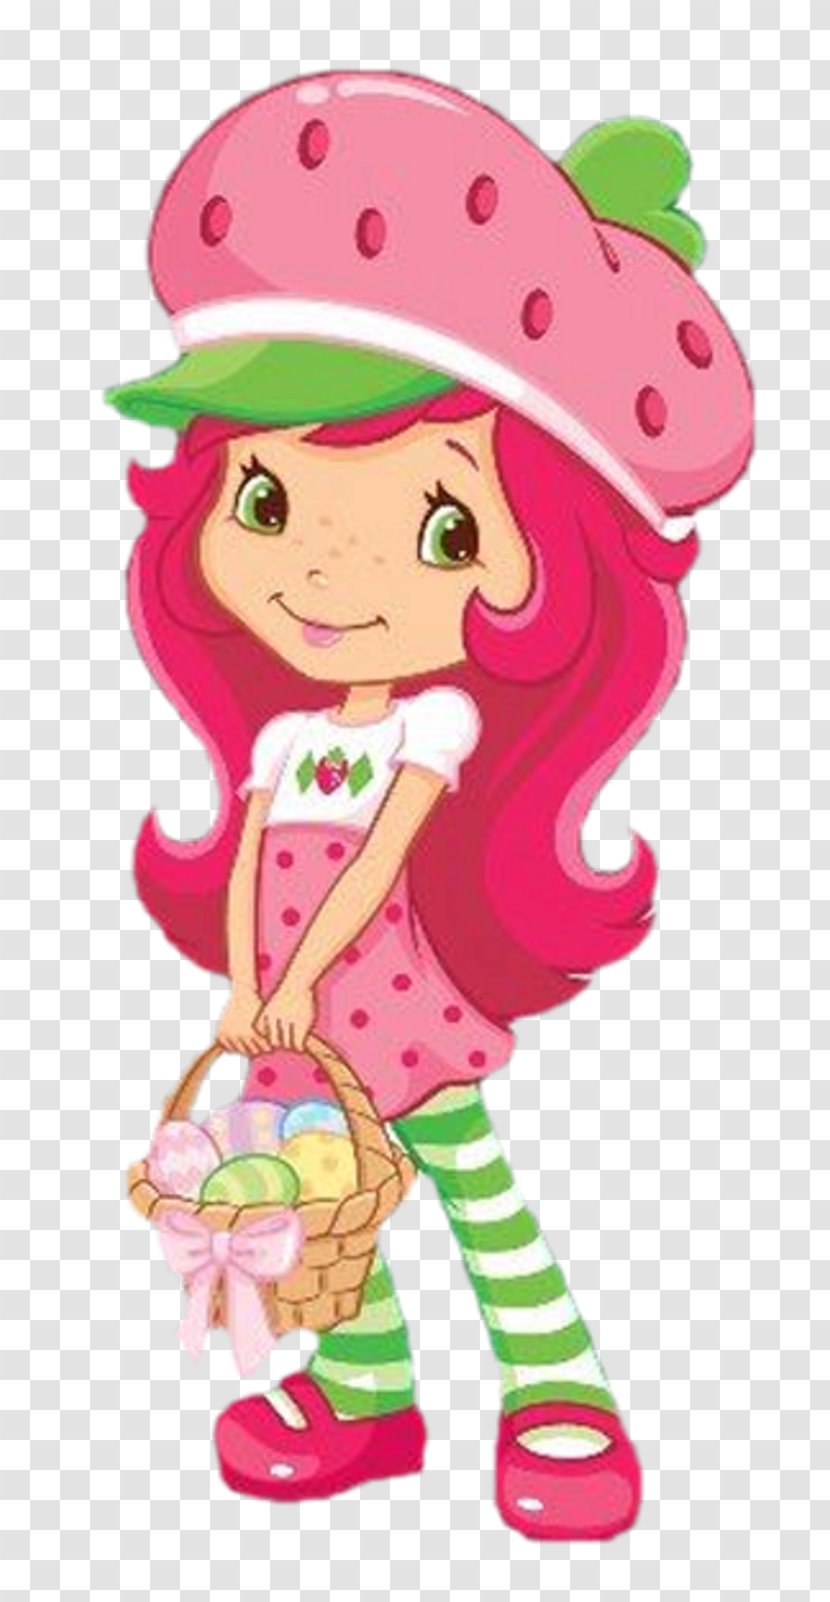 American Muffins Strawberry Shortcake Blueberry - Doll - Number 6 Transparent PNG